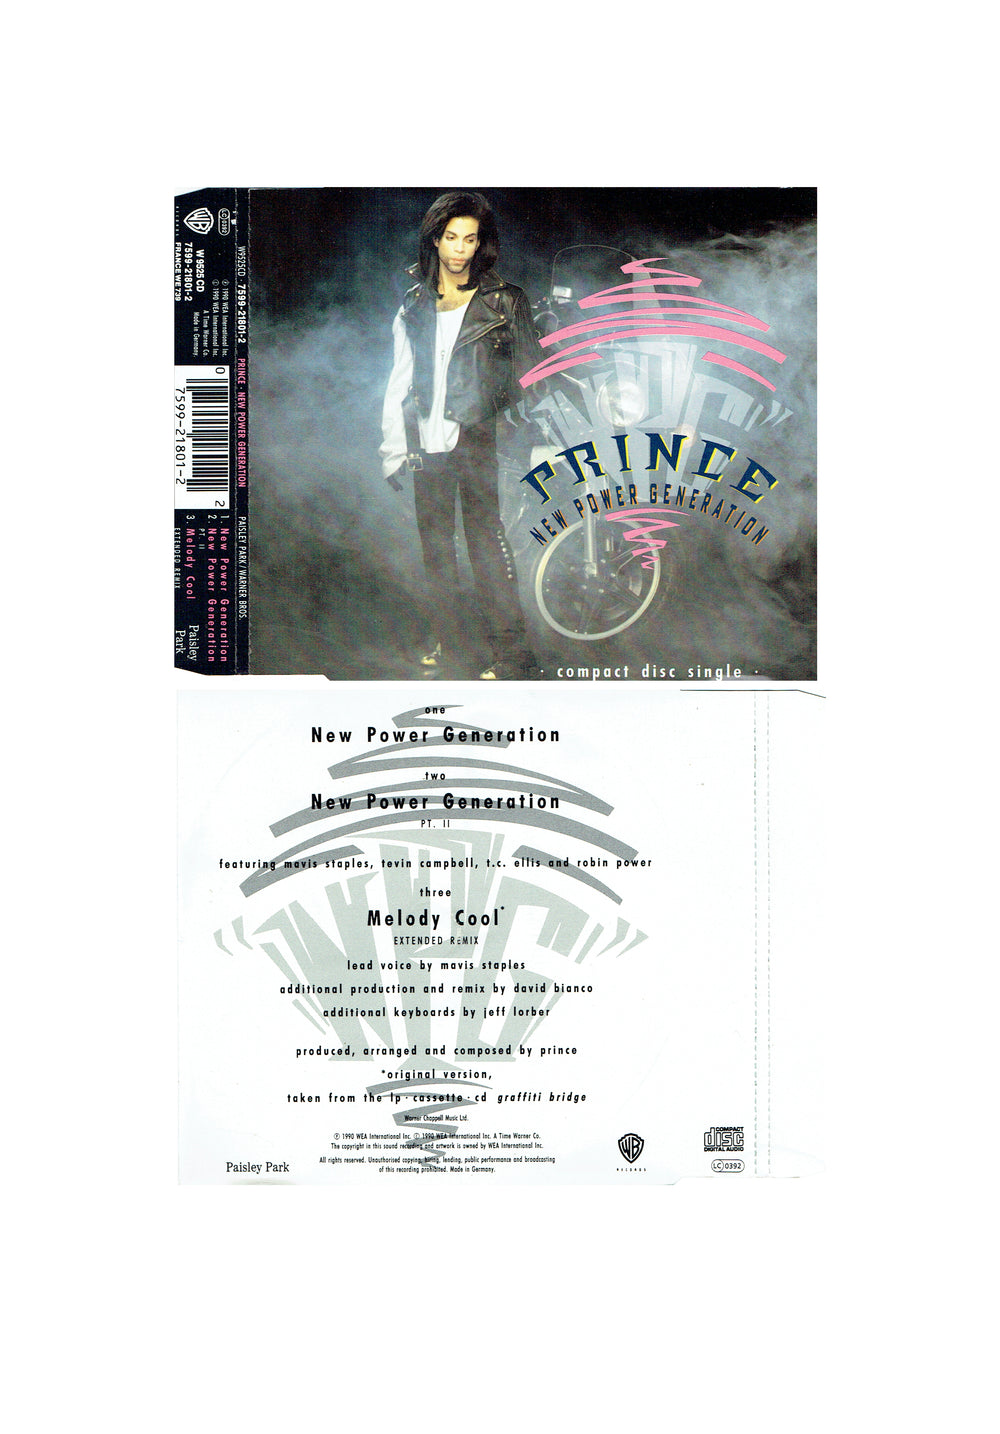 Prince – New Power Generation Inc Melody Cool (Extended Remix) CD Single Europe Preloved: 1990